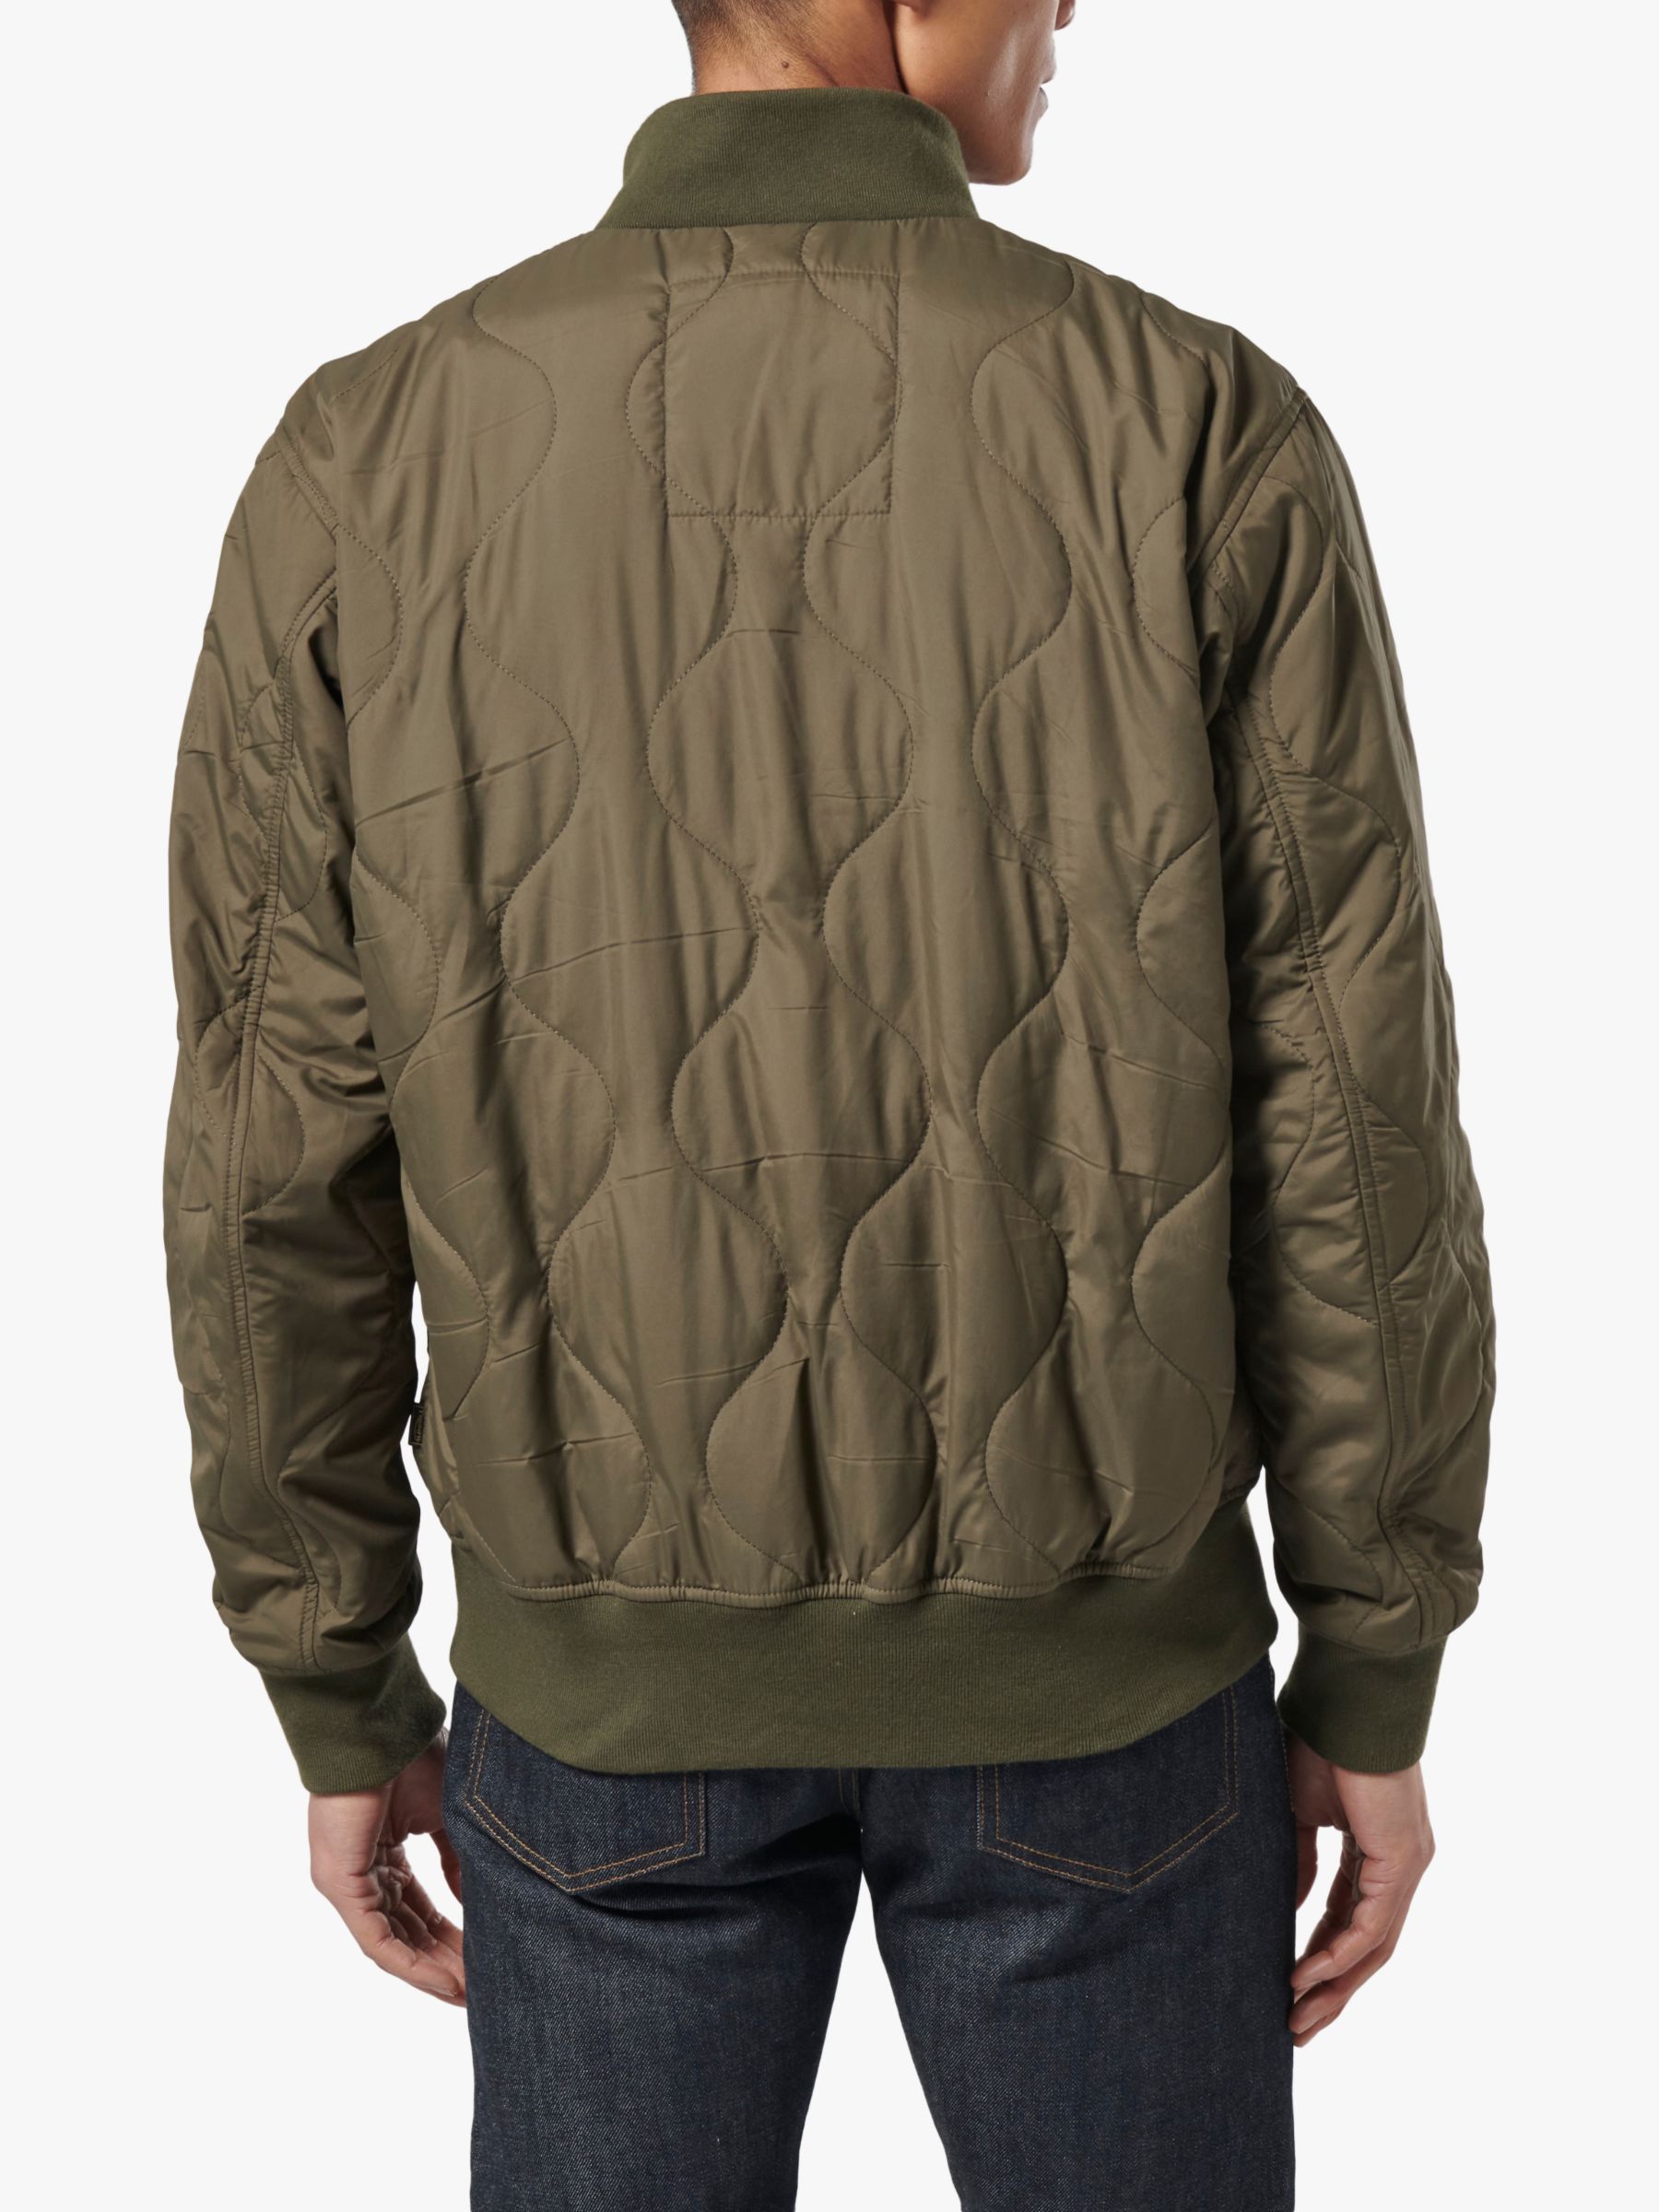 Triumph Motorcycles Crown Bomber Jacket, Olive Green, S